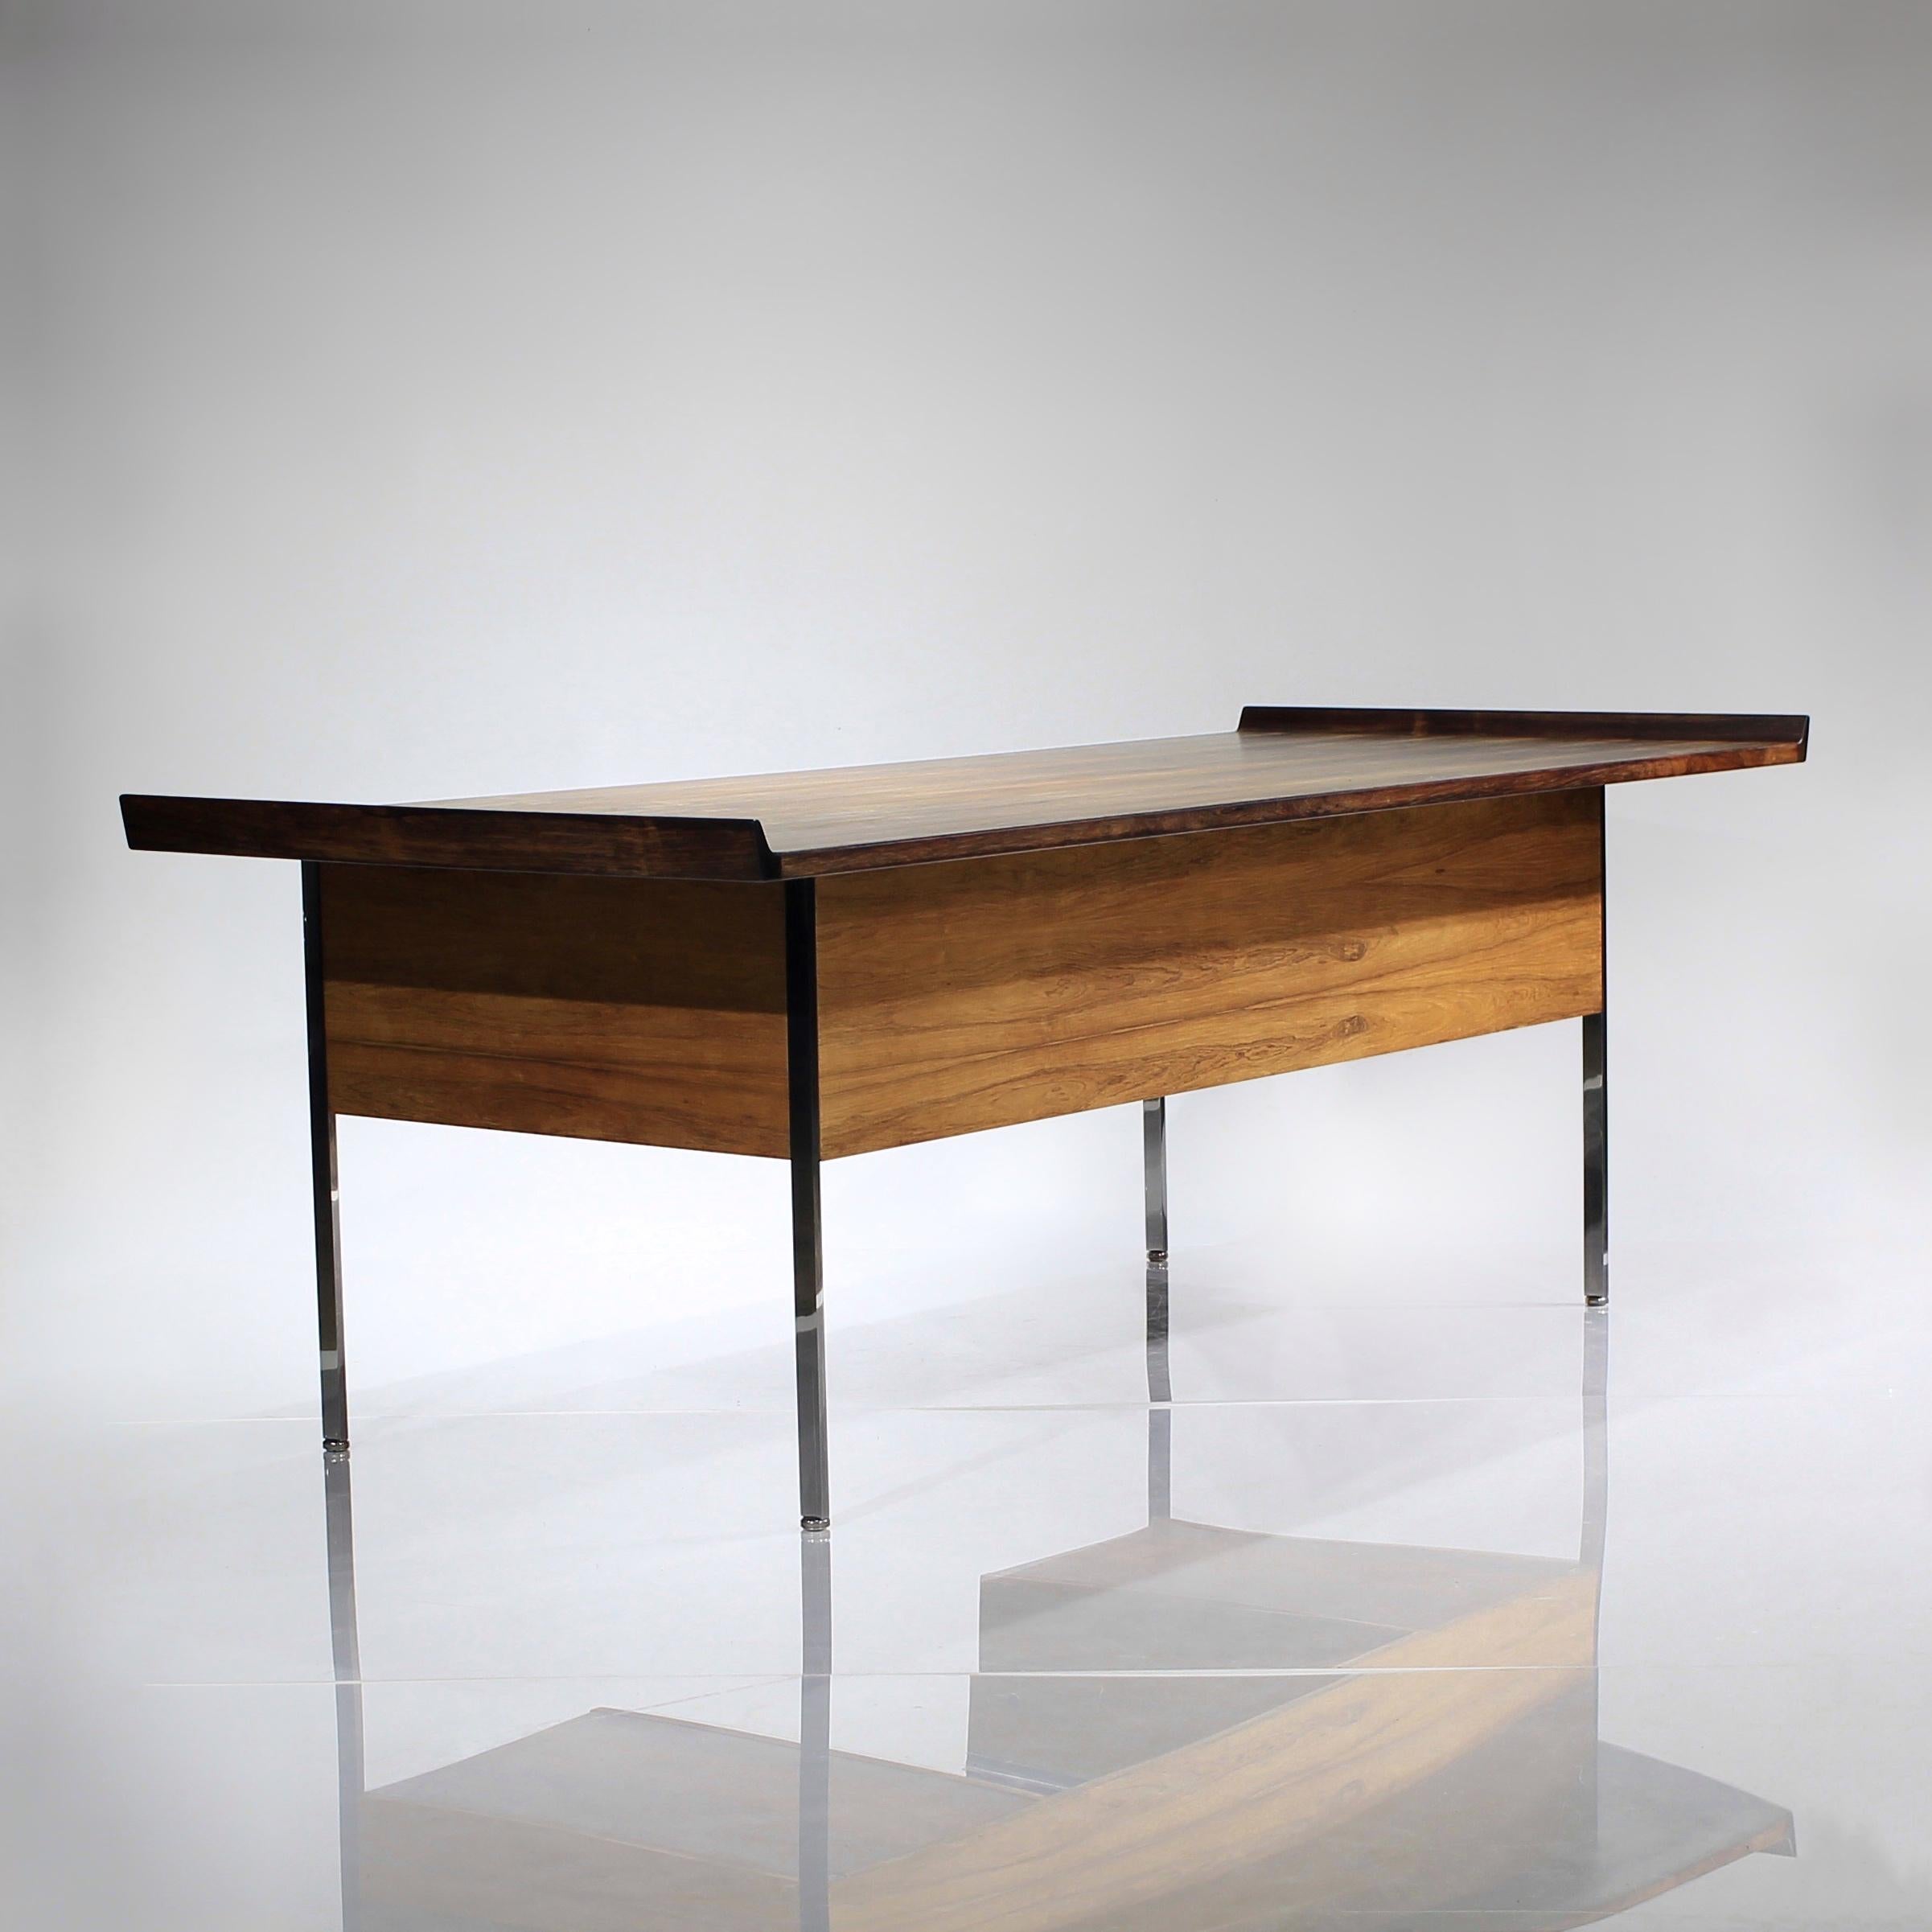 Presenting this extremely rare bleached rosewood executive desk by Harvey Probber. There’s so much to love about this work of art. 

From the mastery of the solid chromed legs, so thoughtfully designed to recess into the corners, to the sculpted